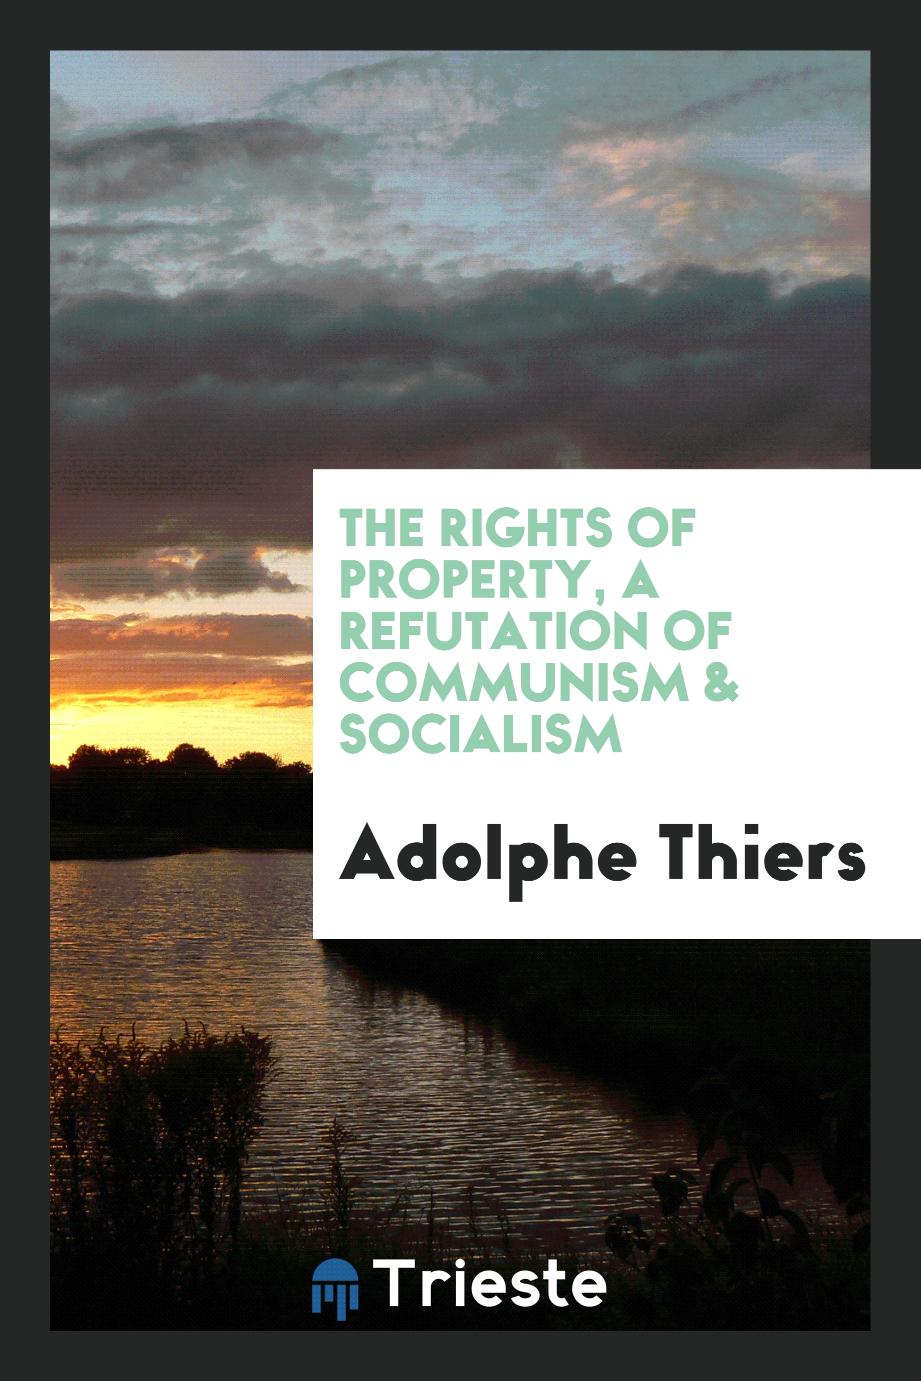 The Rights of Property, a Refutation of Communism & Socialism